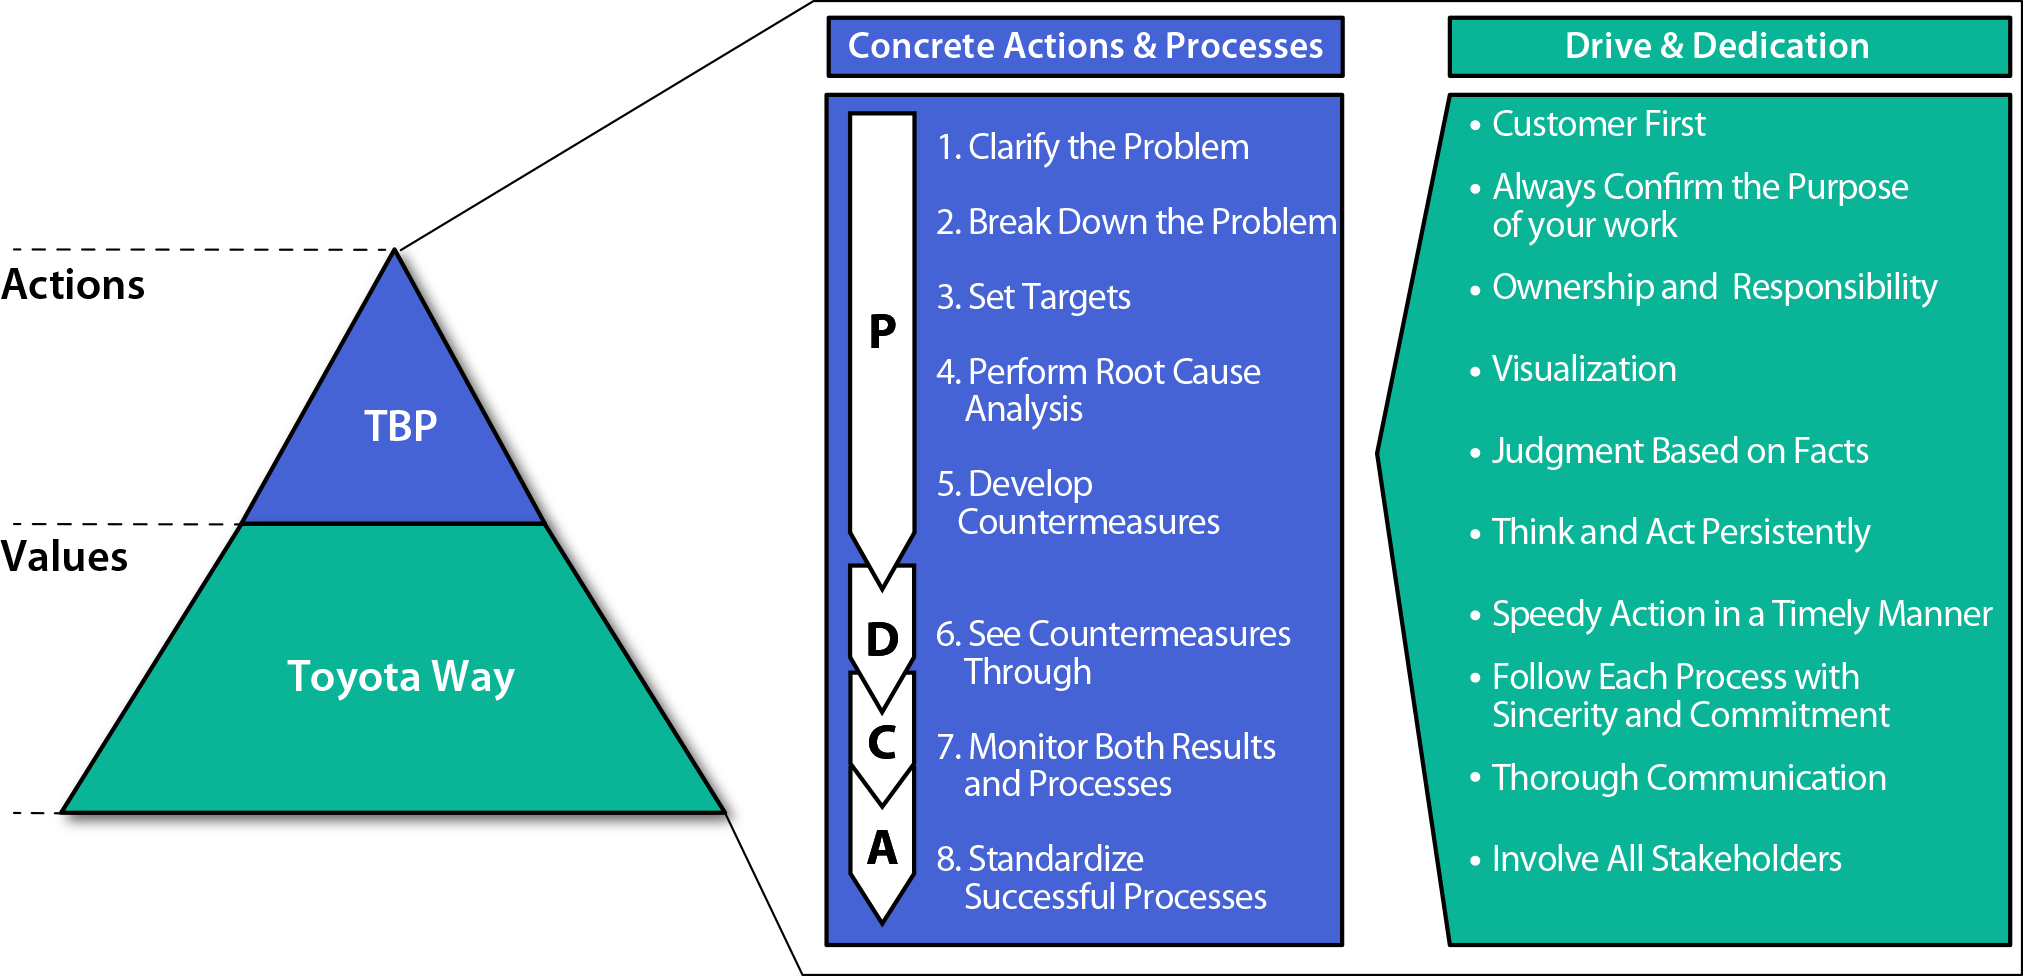 Toyota Business Practices (TBP) and Toyota values. Source: Toyota Motor Corporation.